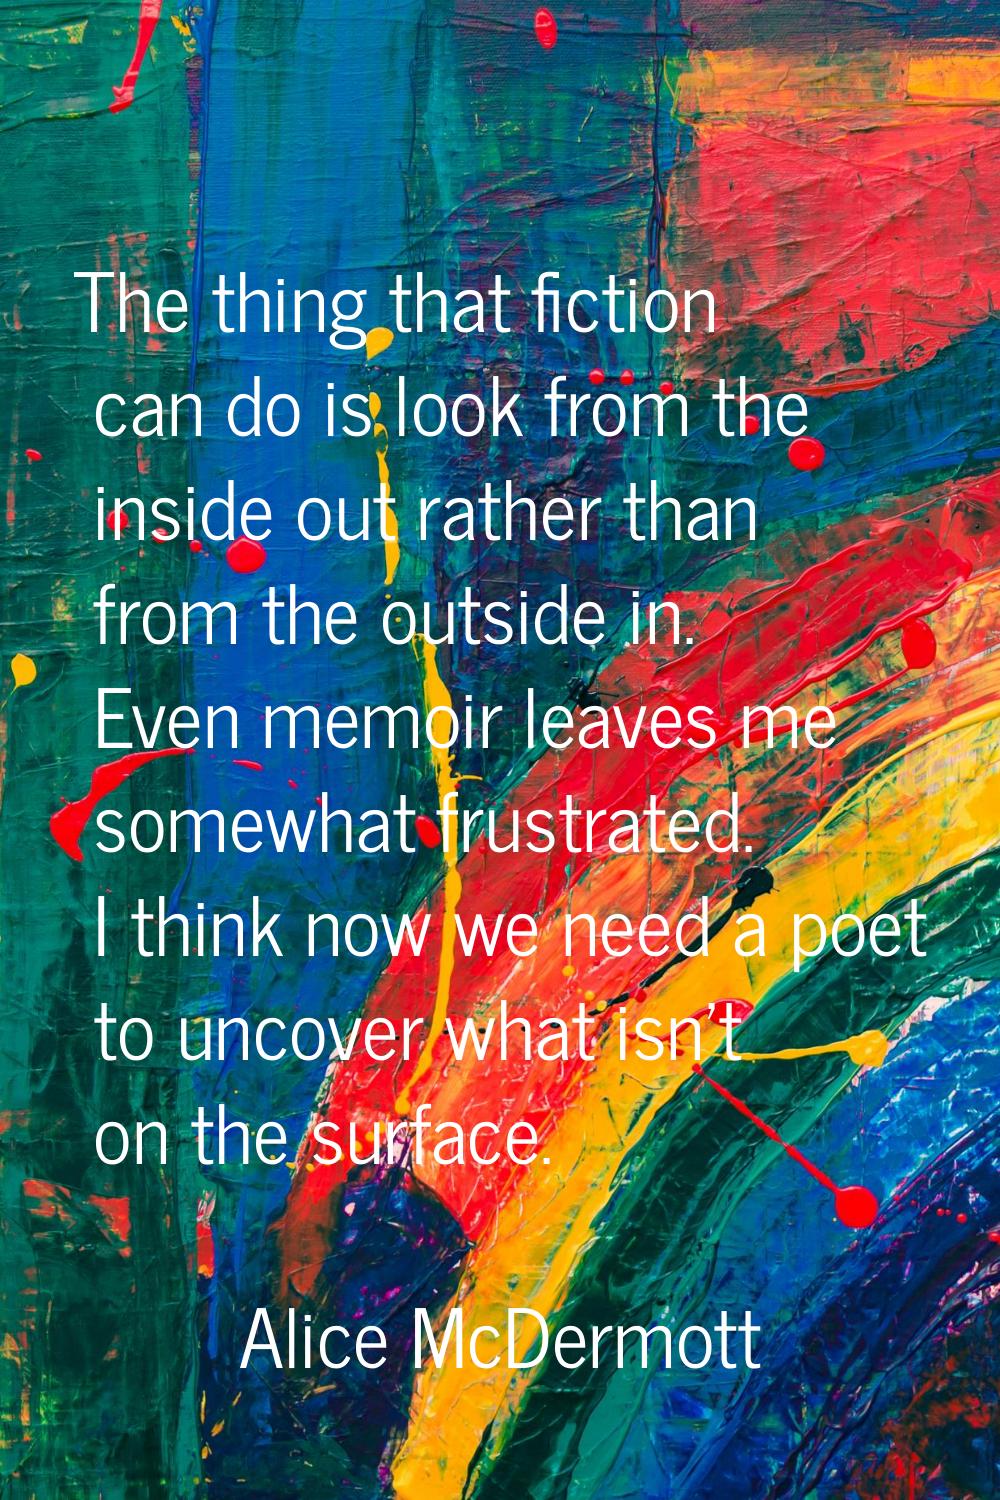 The thing that fiction can do is look from the inside out rather than from the outside in. Even mem